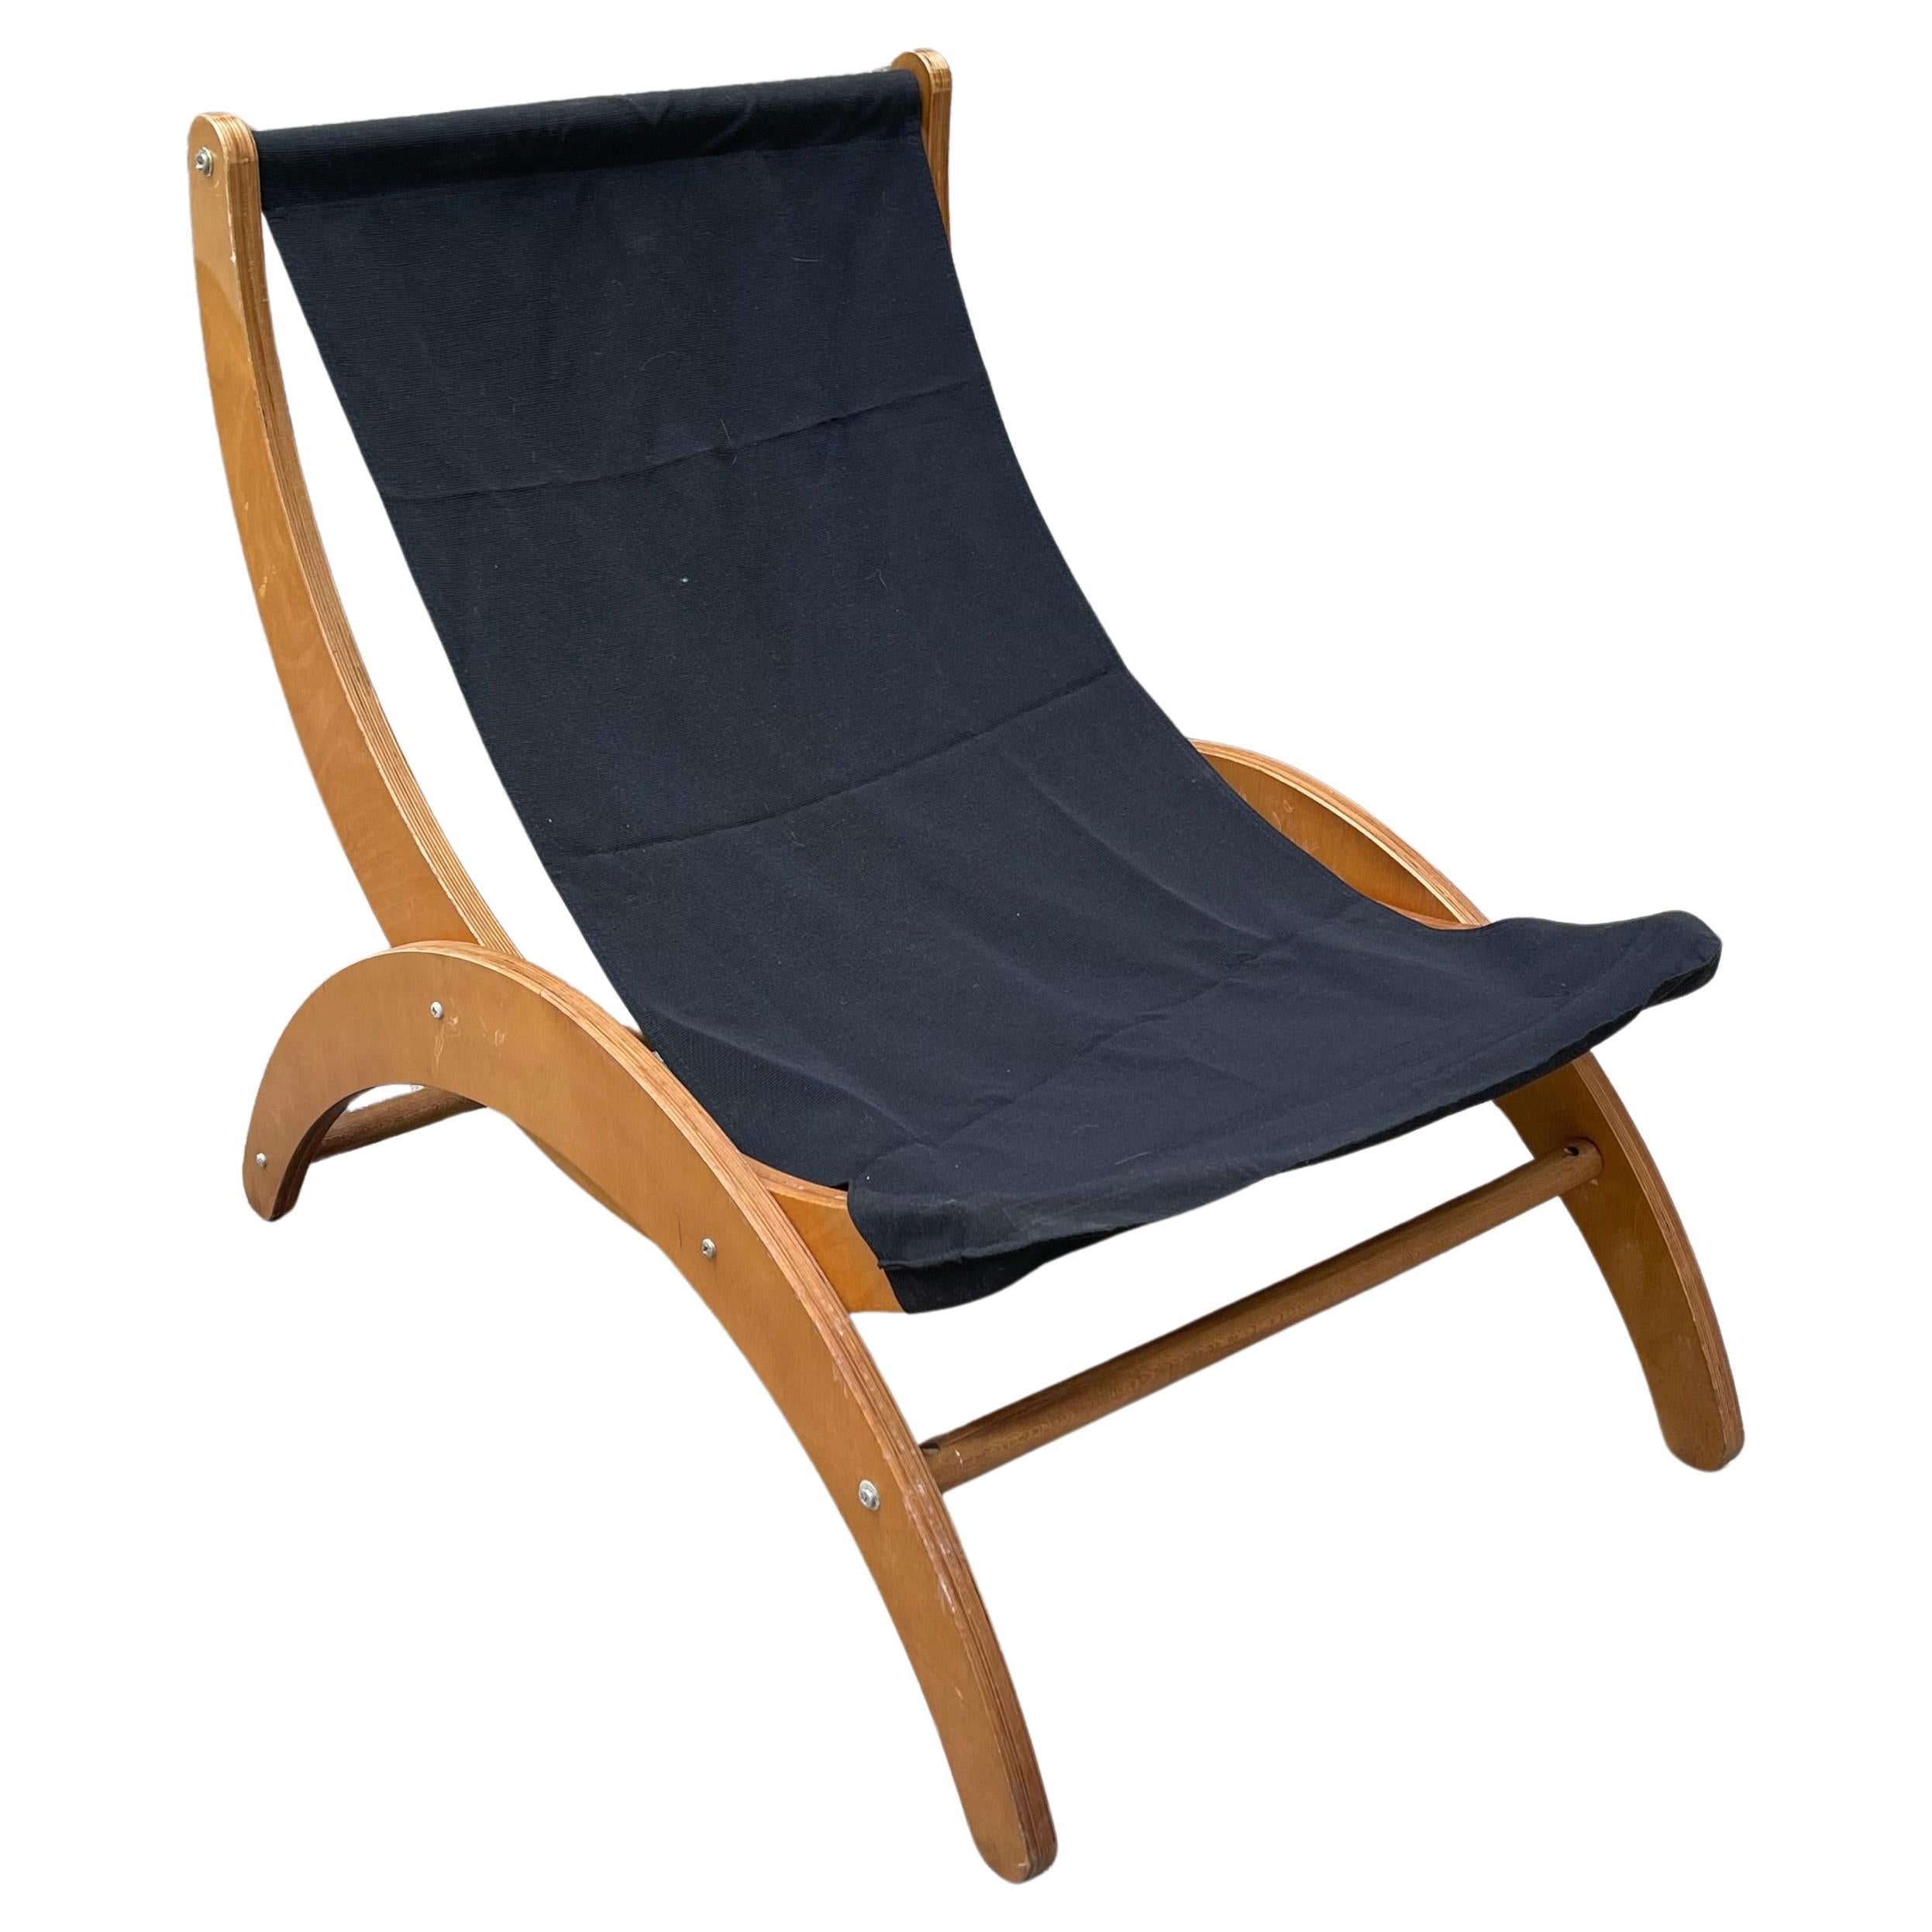 Ingmar Relling Living Room Armchair in Black Fabric, 1960s, Norway For Sale